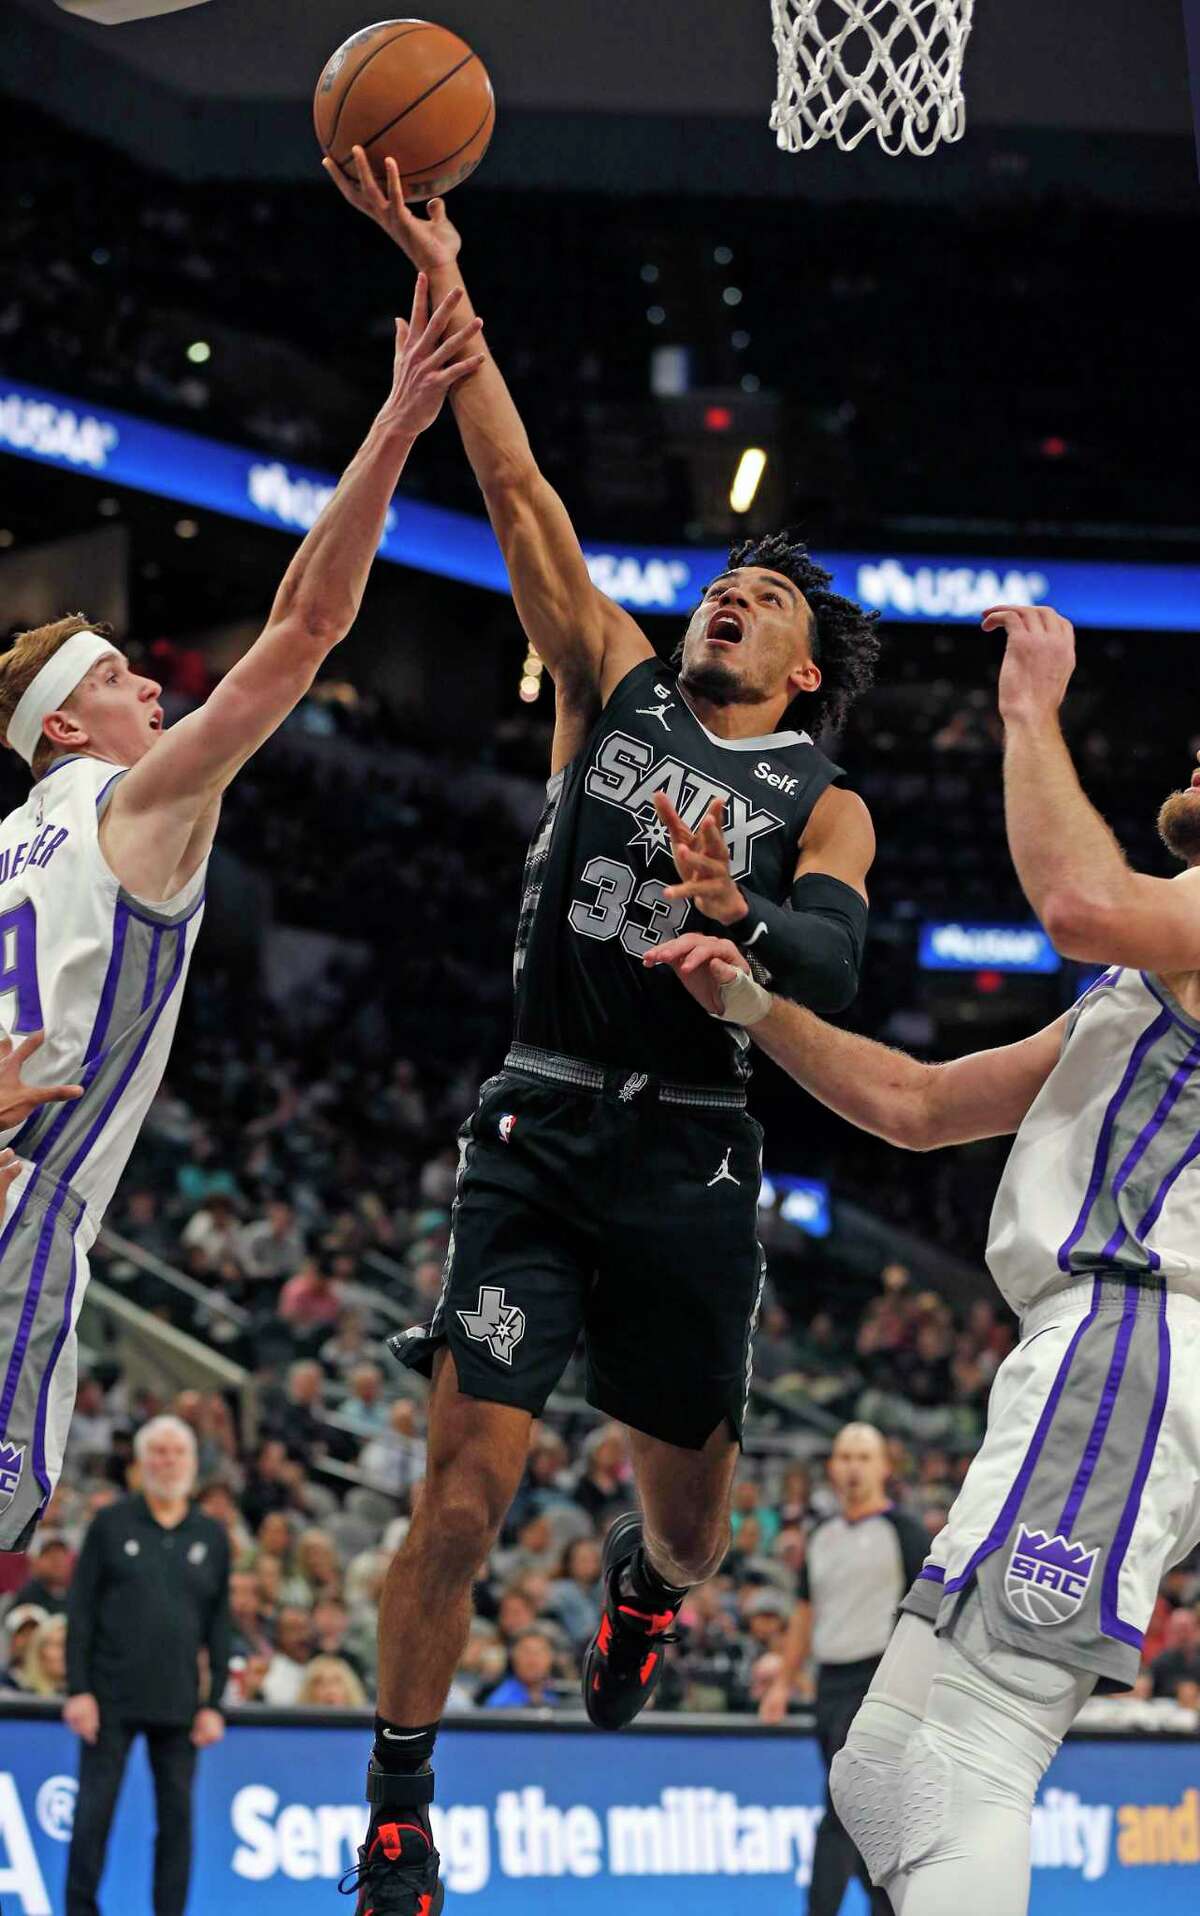 The Spurs’ Tre Jones drives for two of his 16 points Sunday against the Kings at the AT&T Center.